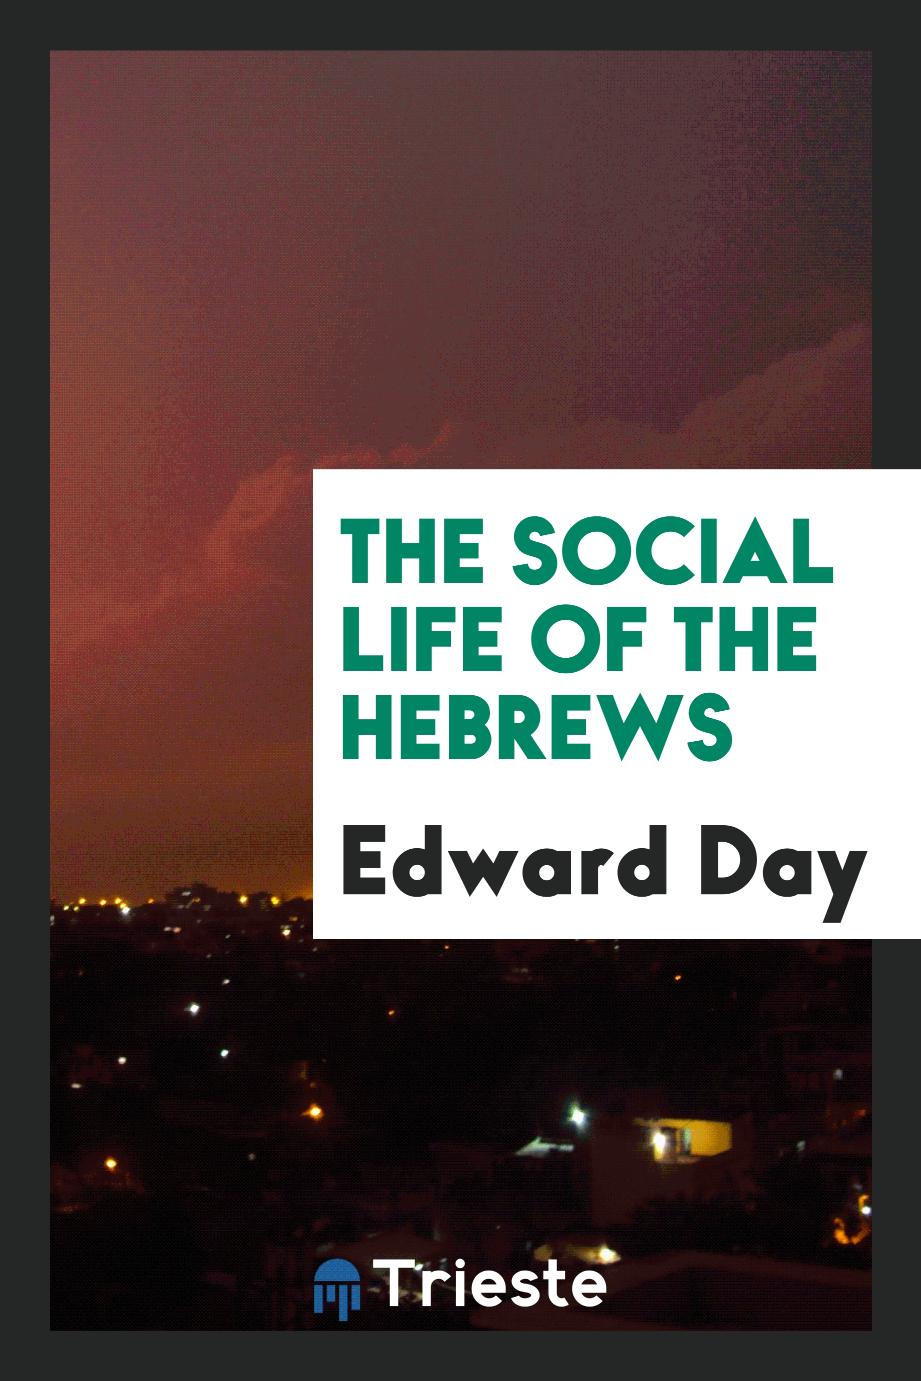 The social life of the Hebrews